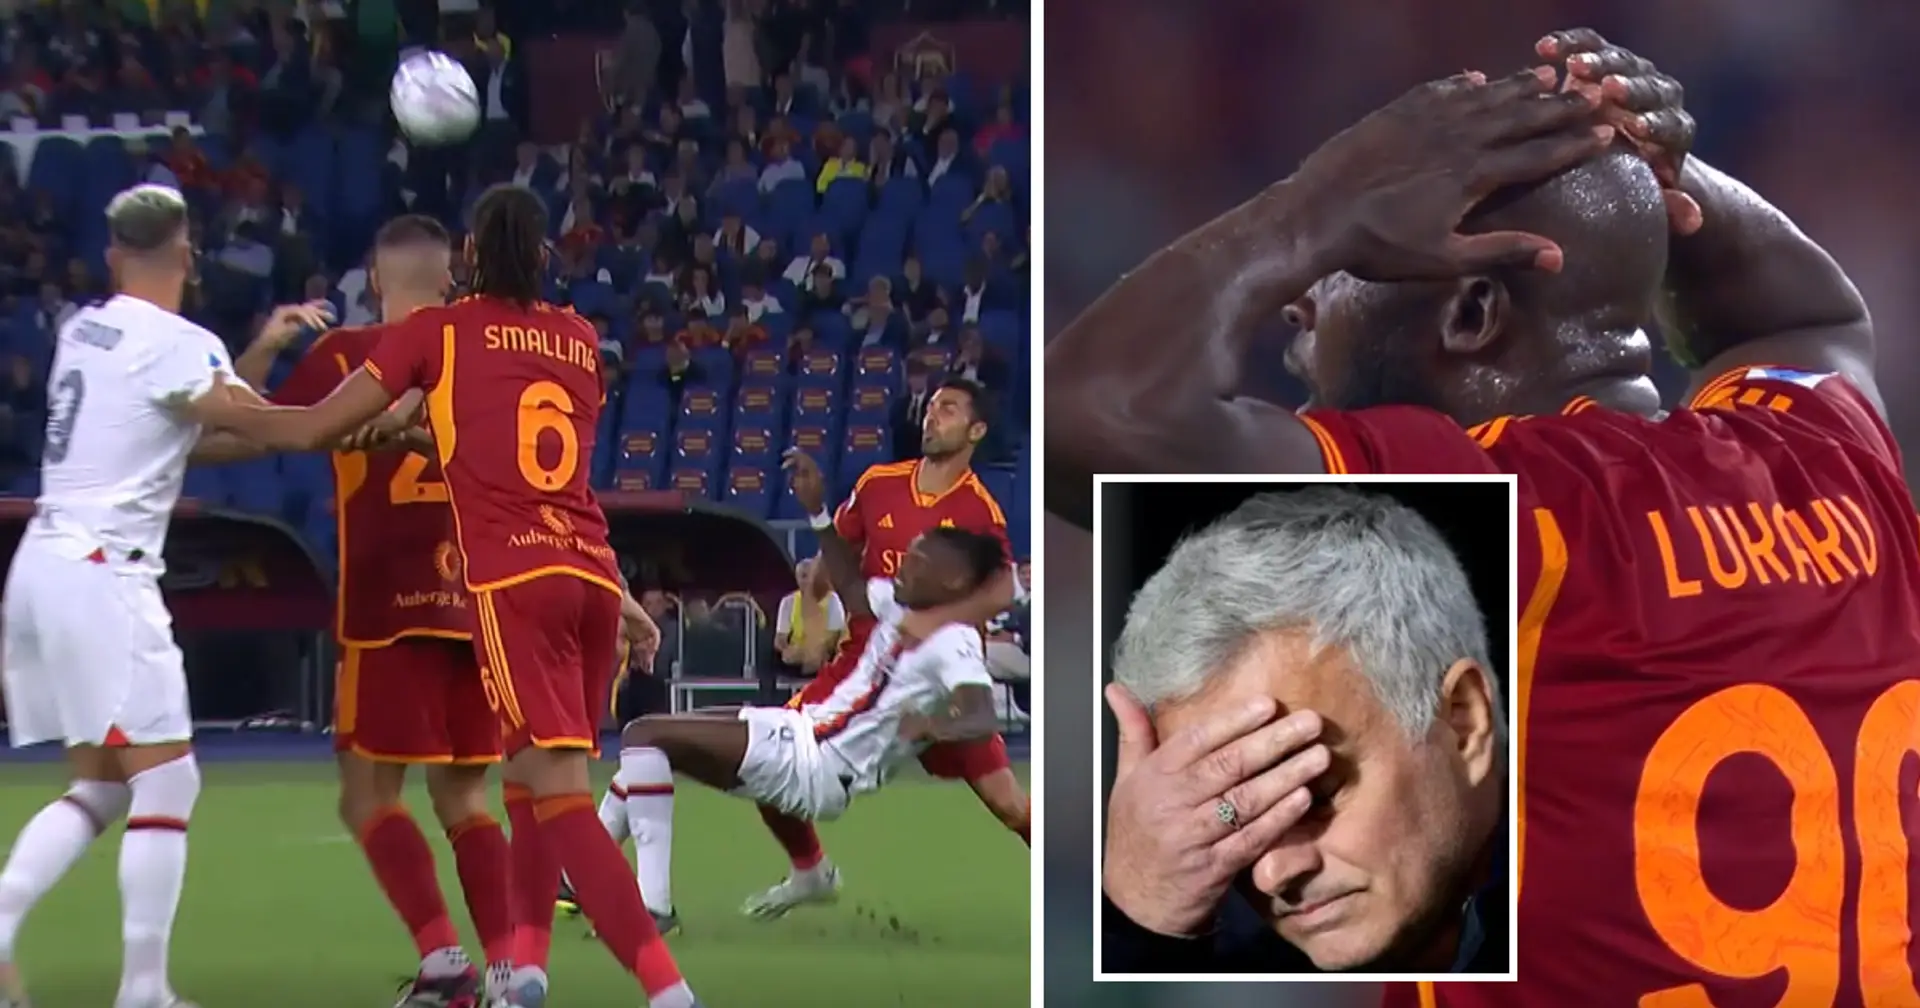 Jose Mourinho's AS Roma in relegation zone after 3 games following big transfer campaign